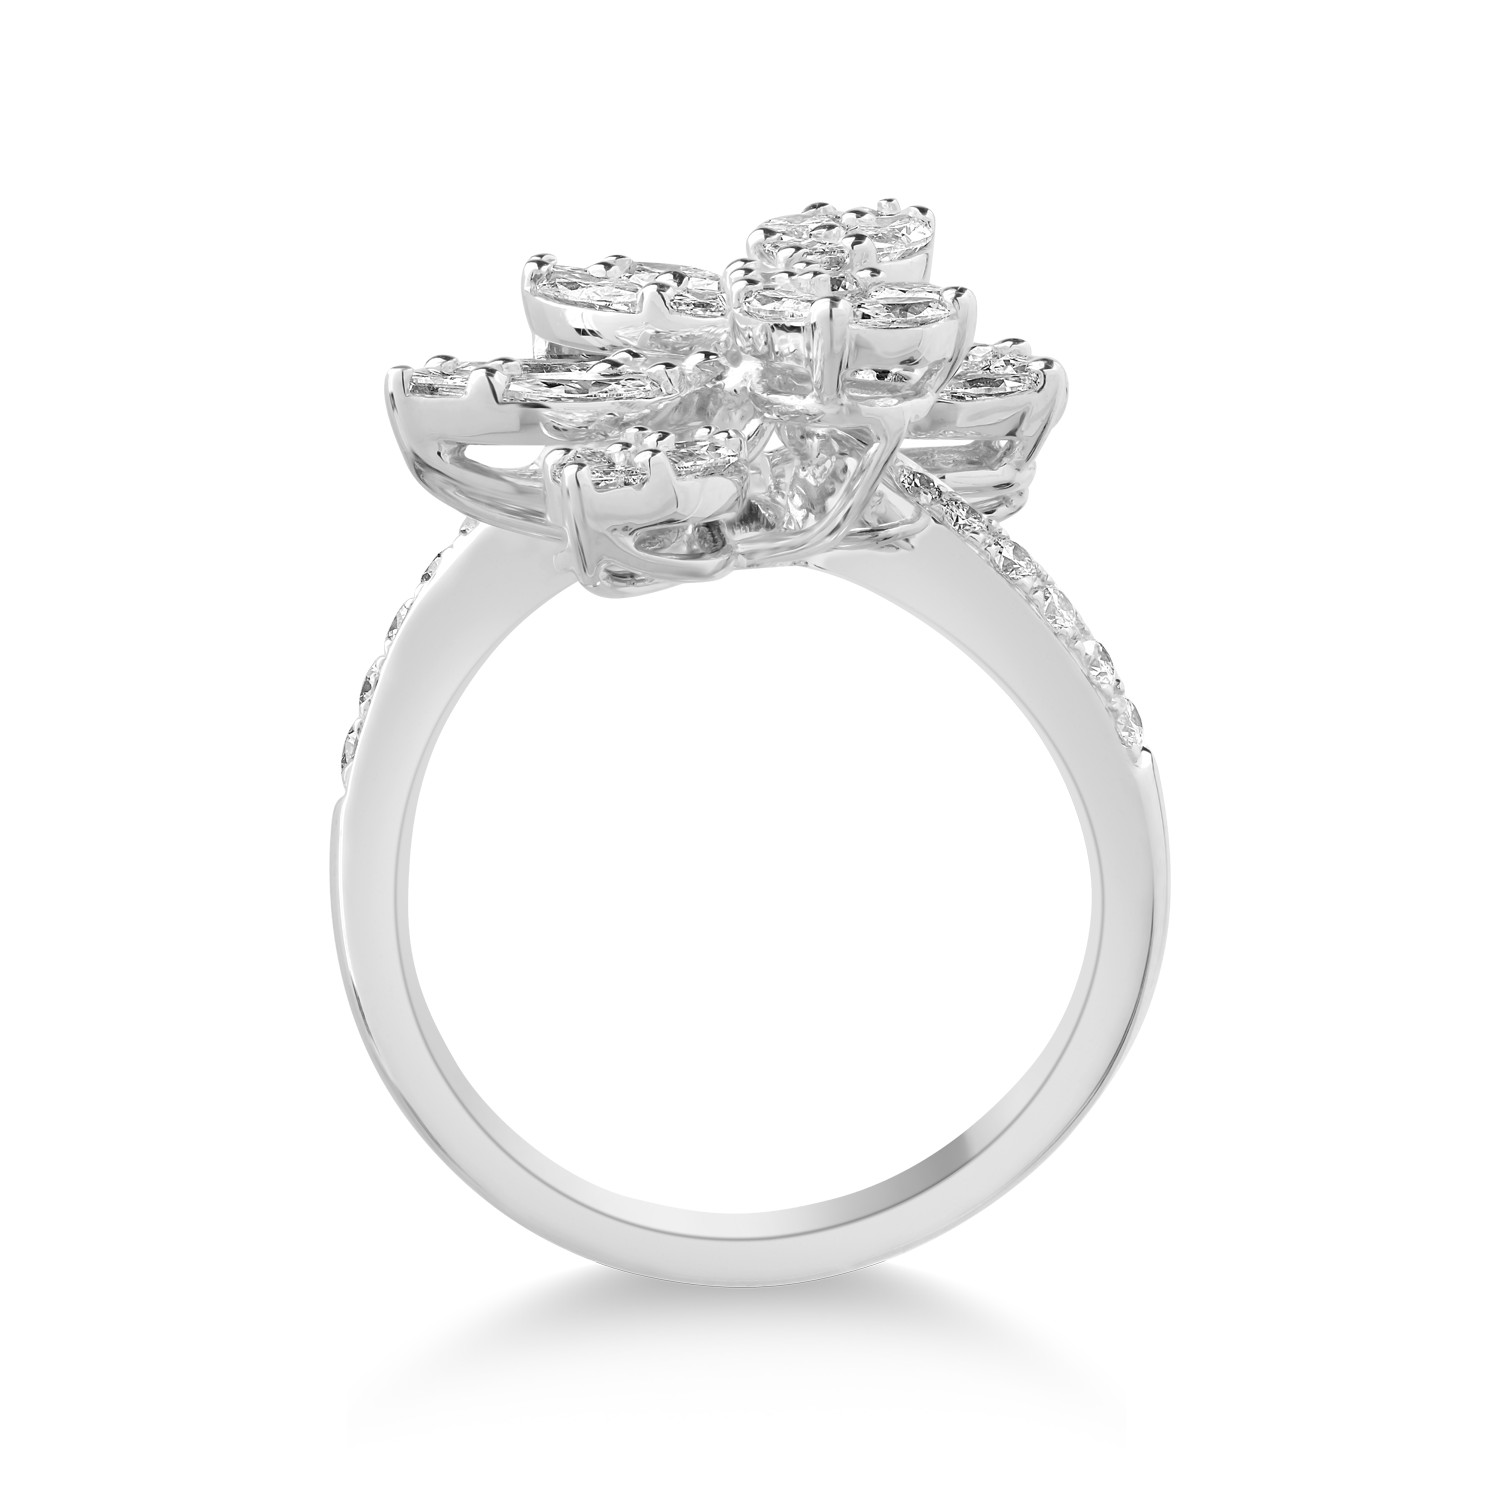 White gold ring with 2.09ct diamonds